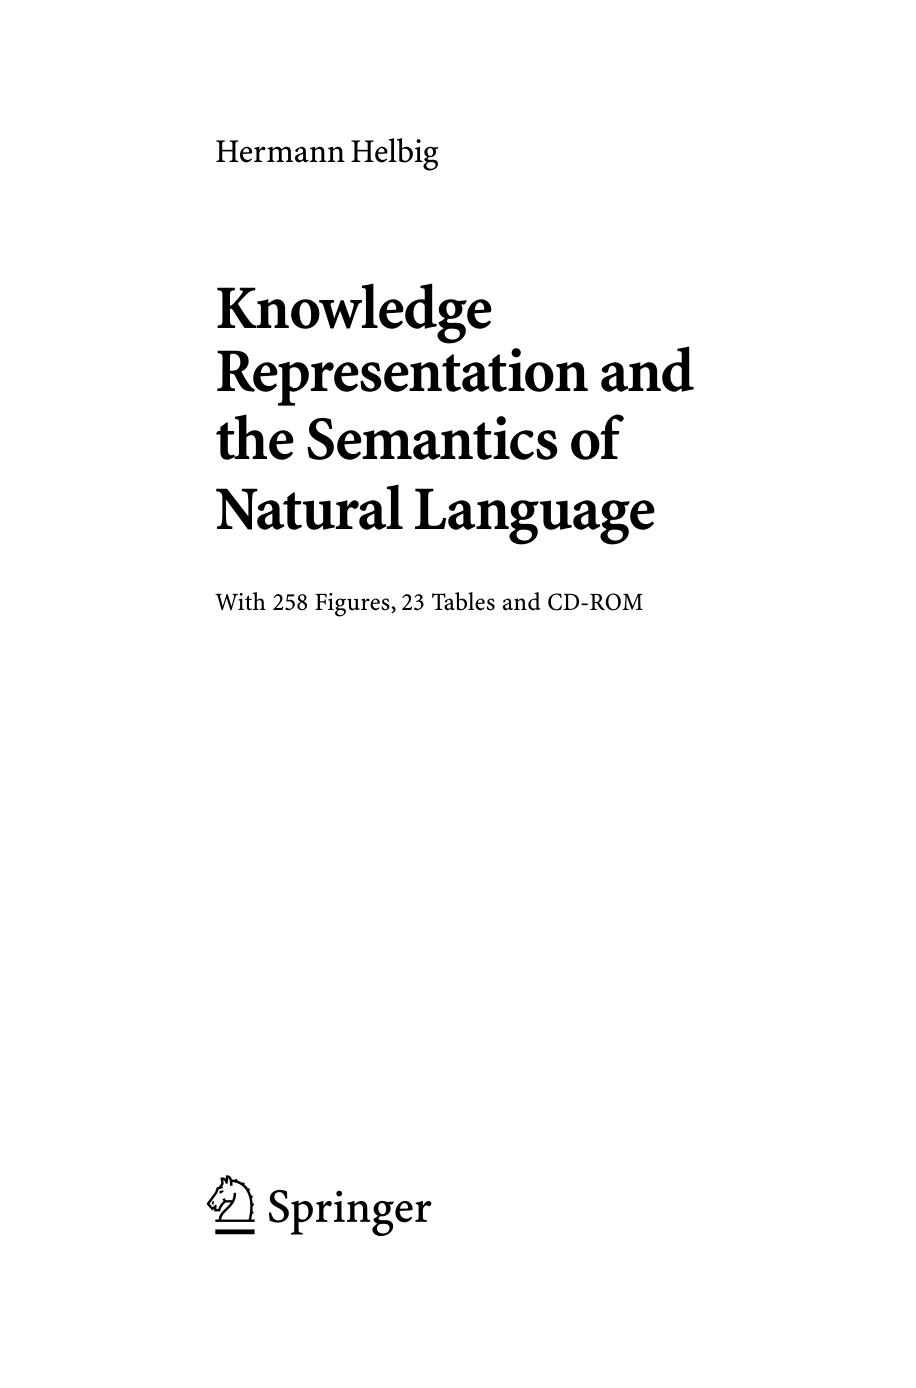 Knowledge representation and the semantics of natural language with 258 figures, 23 tables